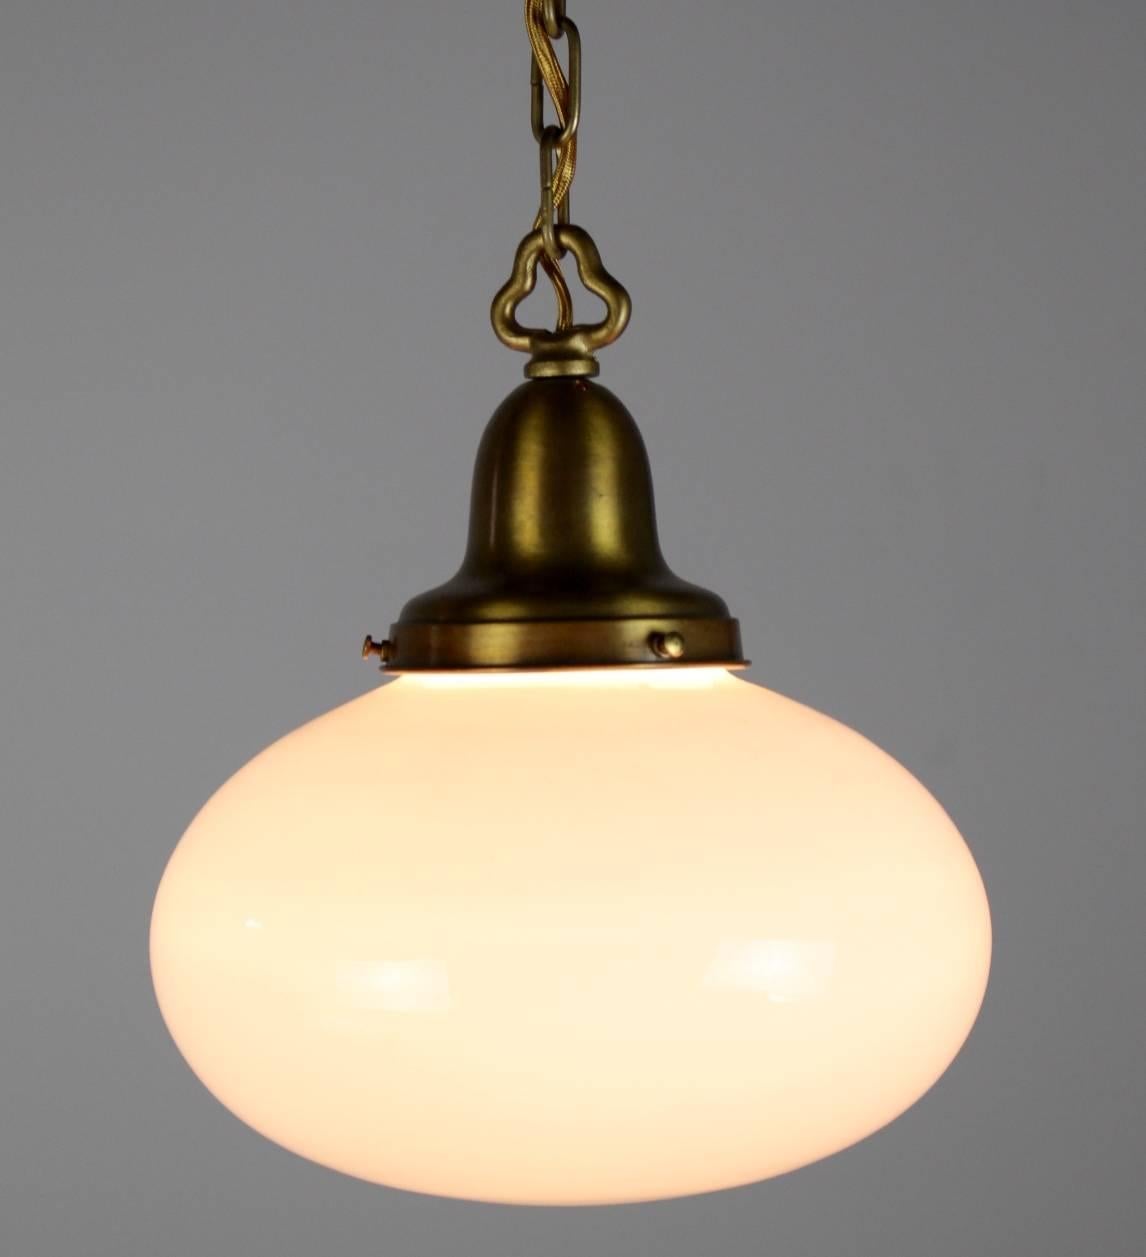 Lovely, simple pendant globe fixture.
Finished in a light olive bronze with oval white glass globe shade, 
circa 1925
Measures: 36